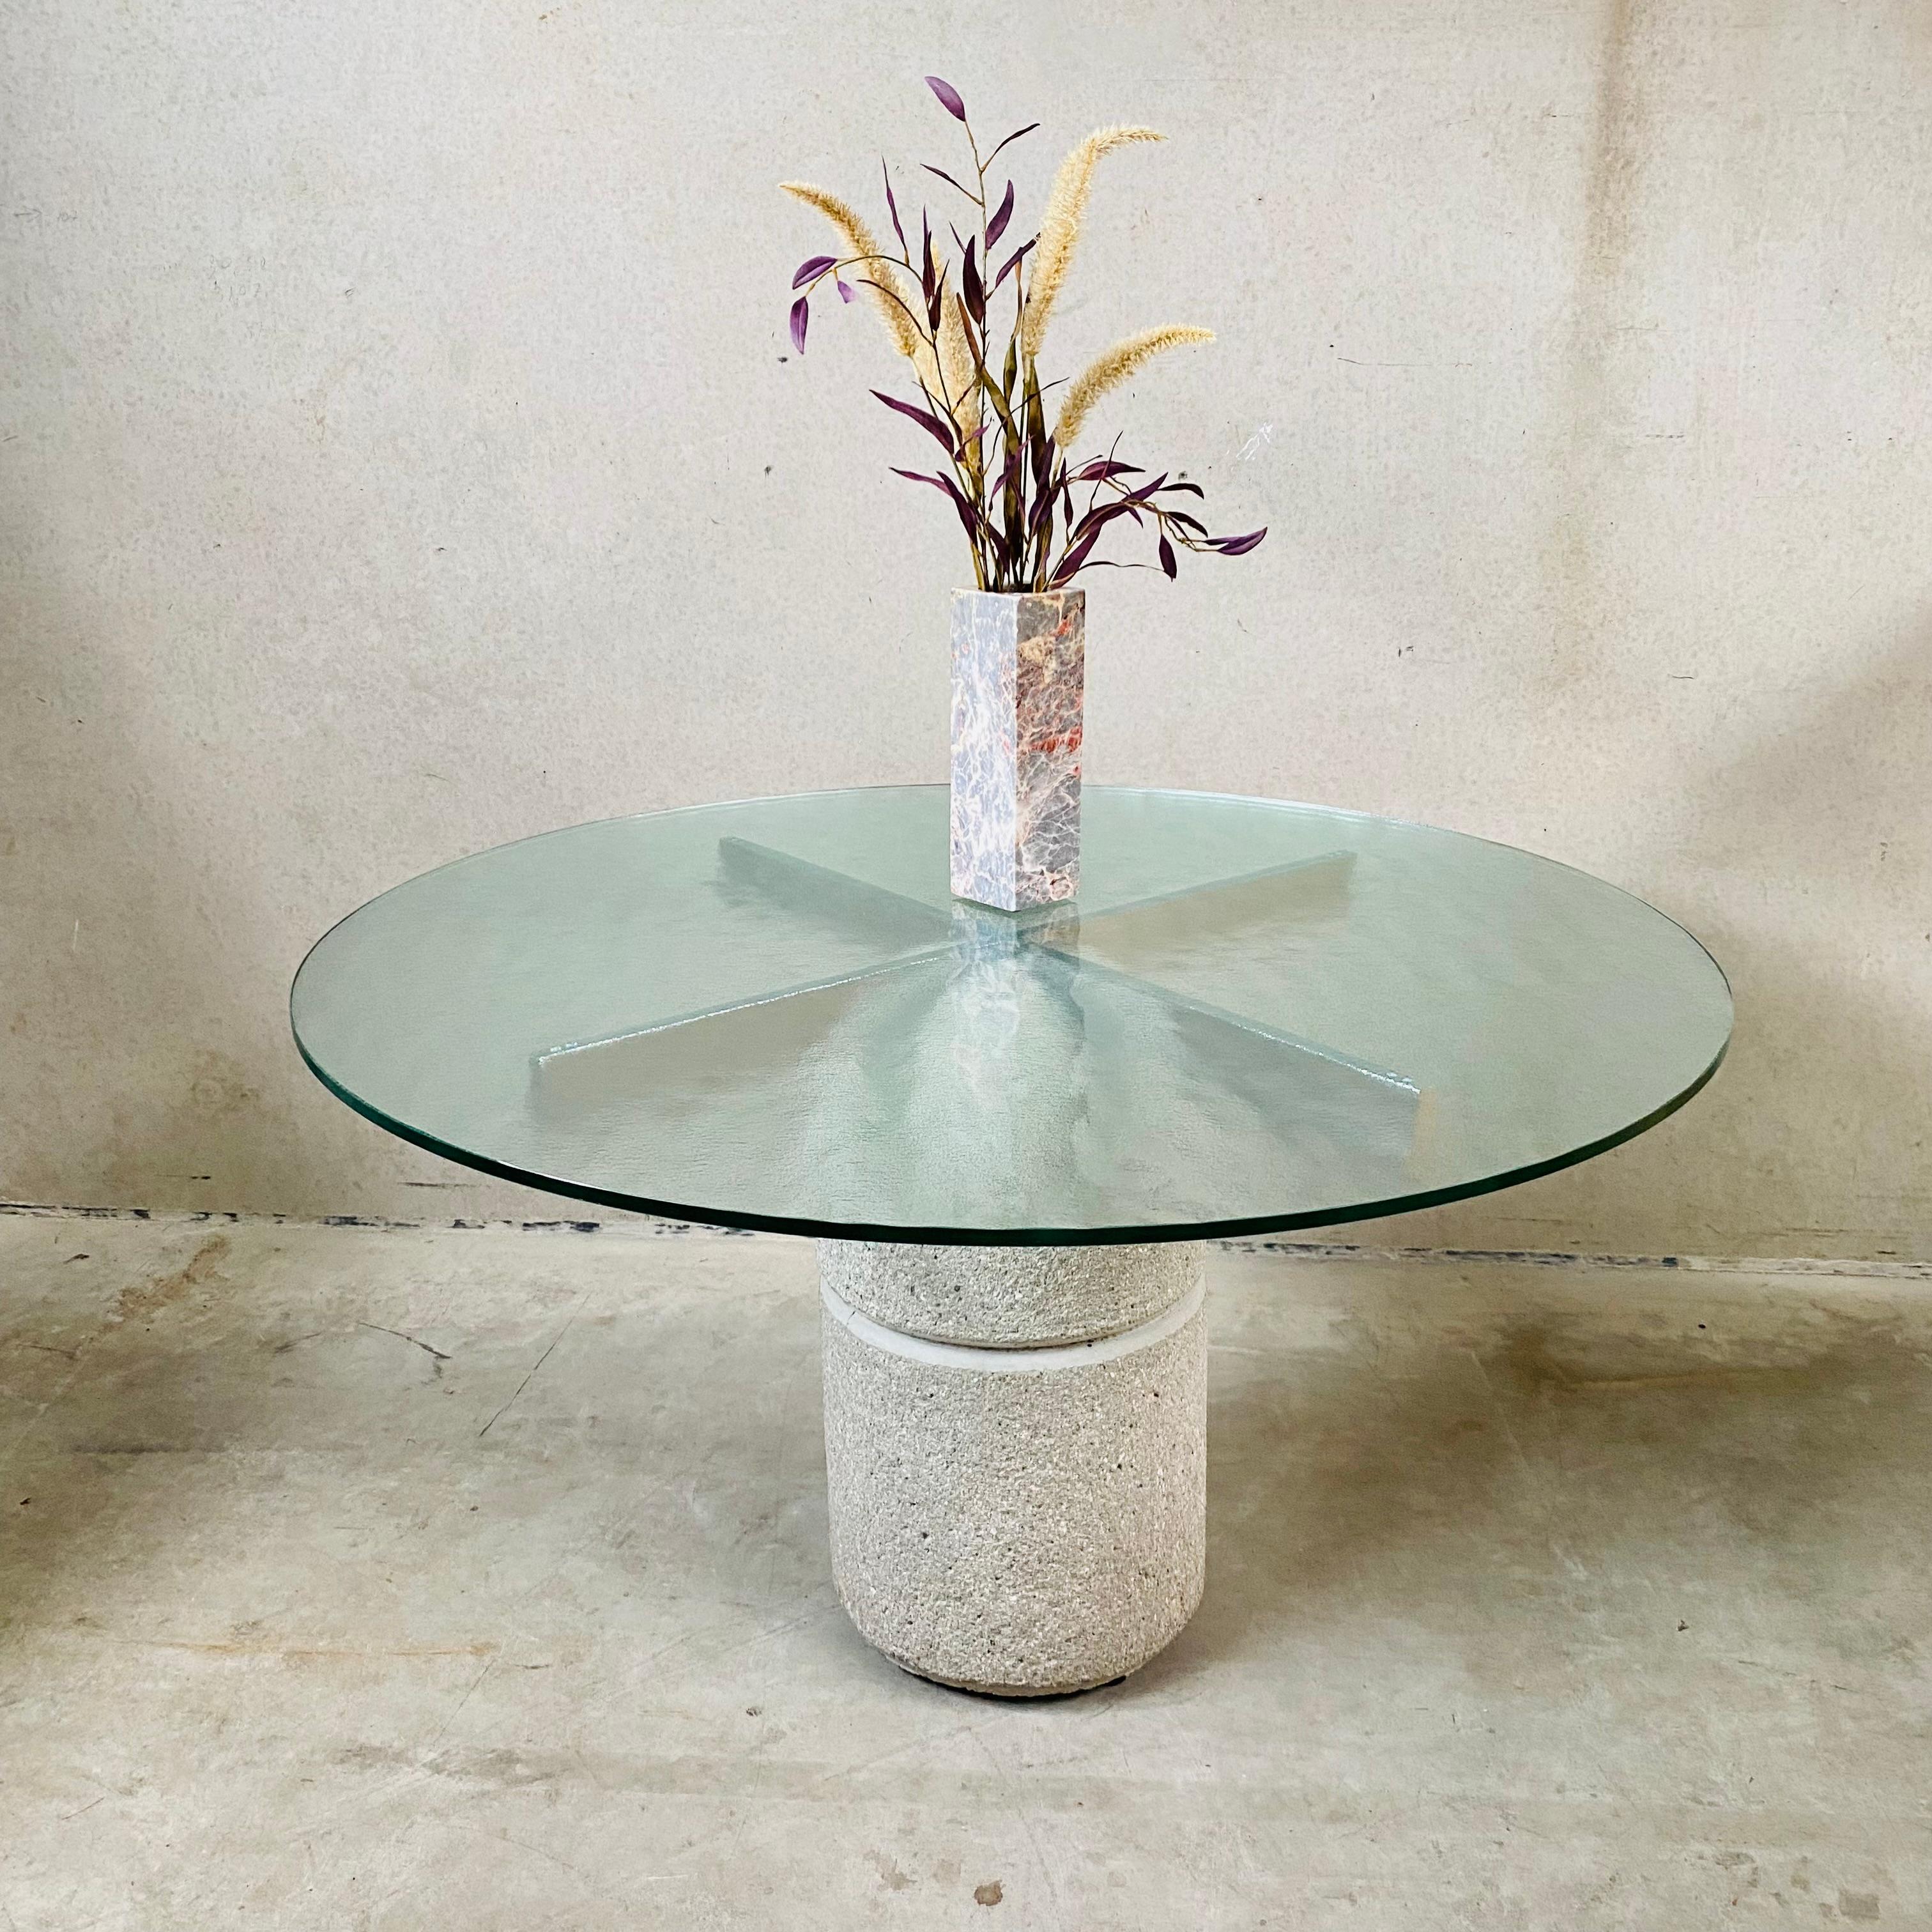 Iconic Mid-Century Dining Table: Giovanni Offredi's 